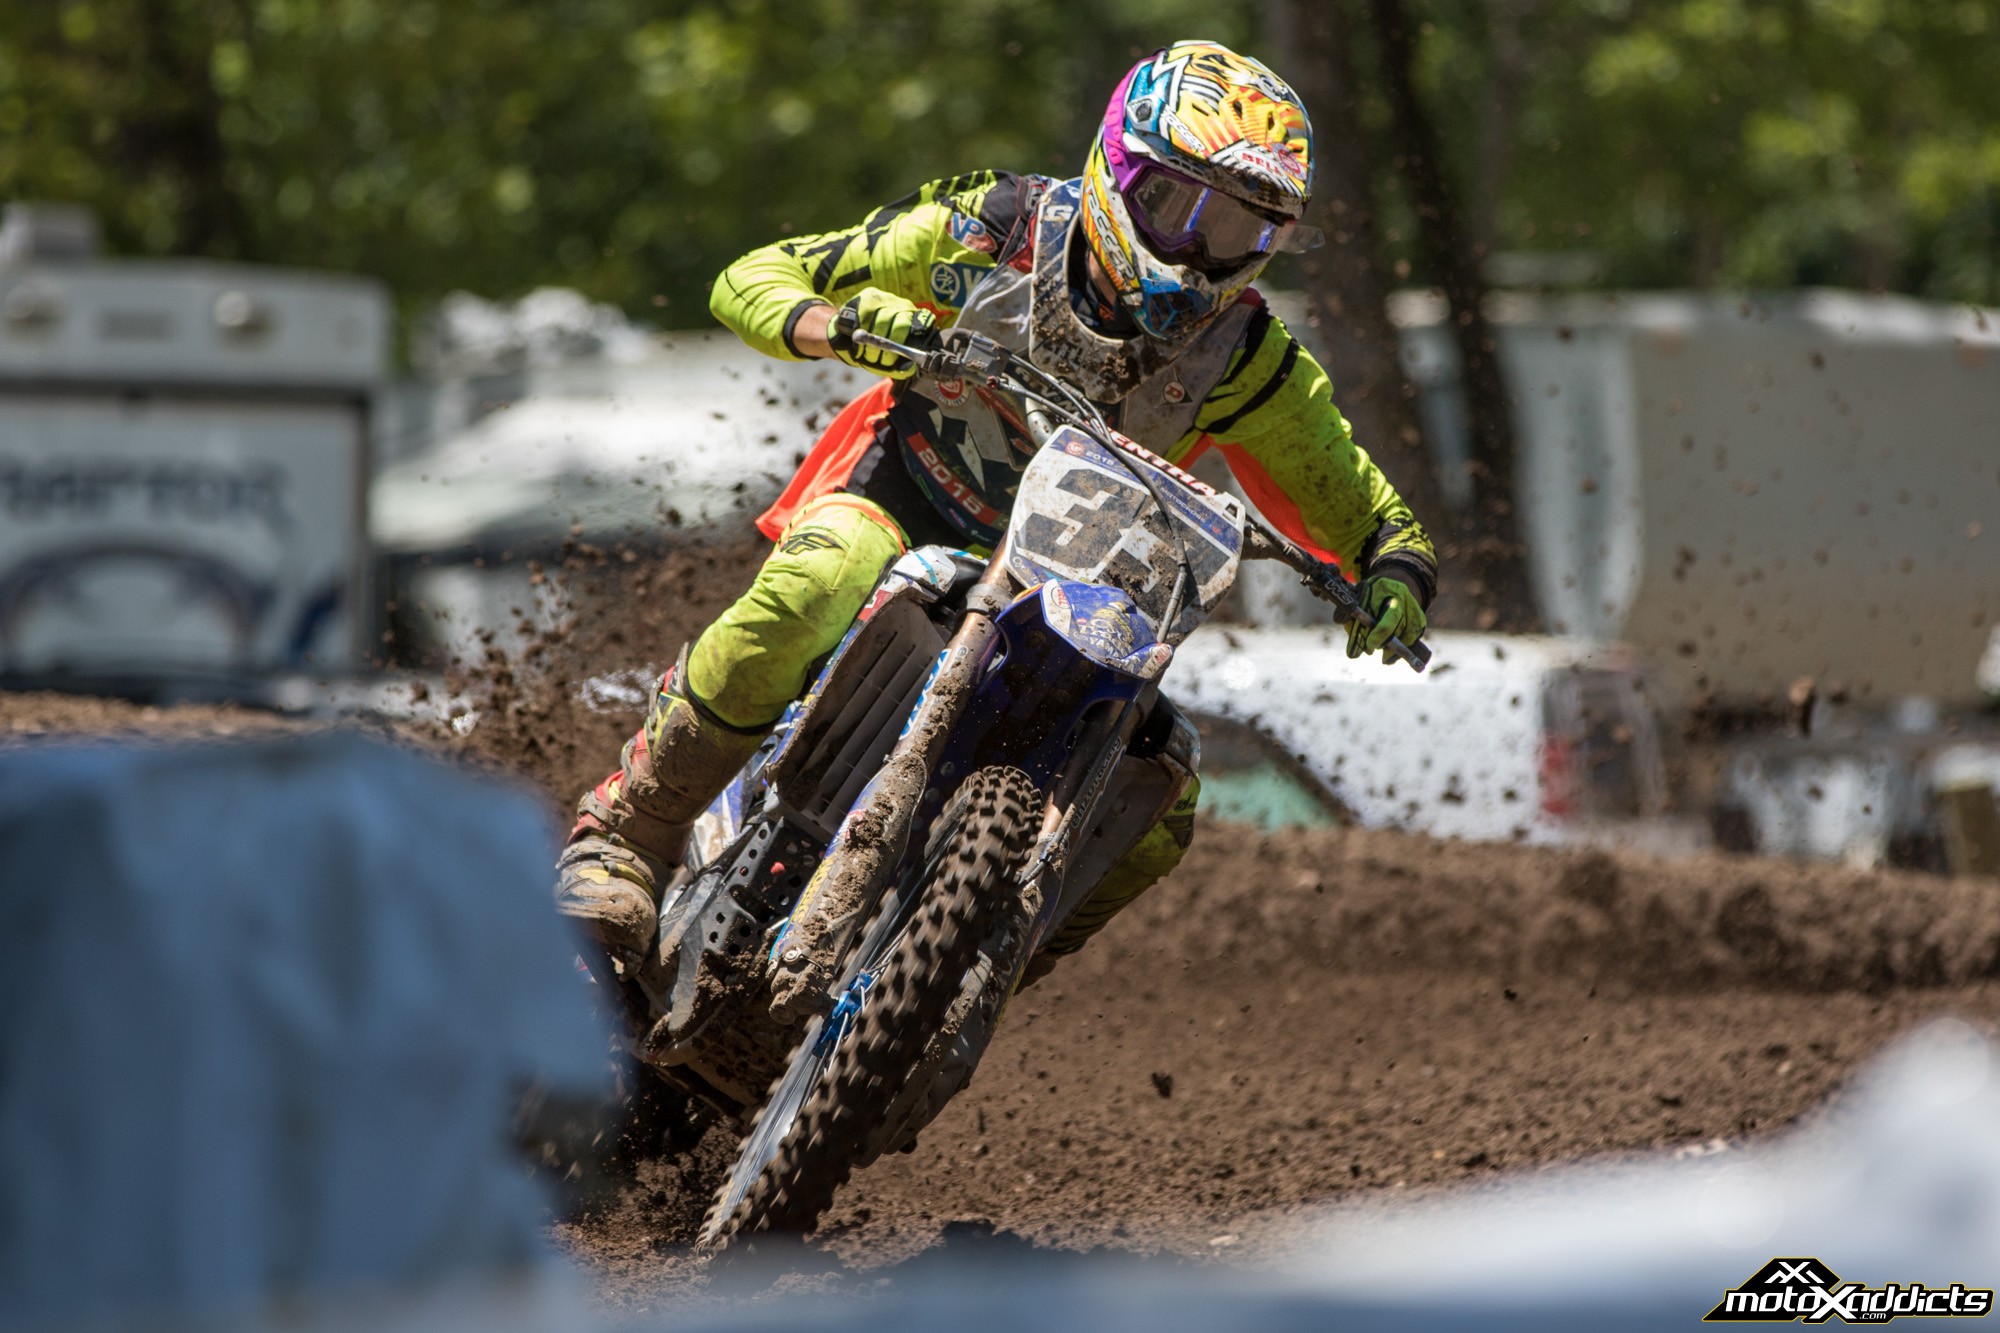 Benny was the standout A rider at this year's Loretta Lynn's Amateur National Championship. Photo by: Andrea Barnett